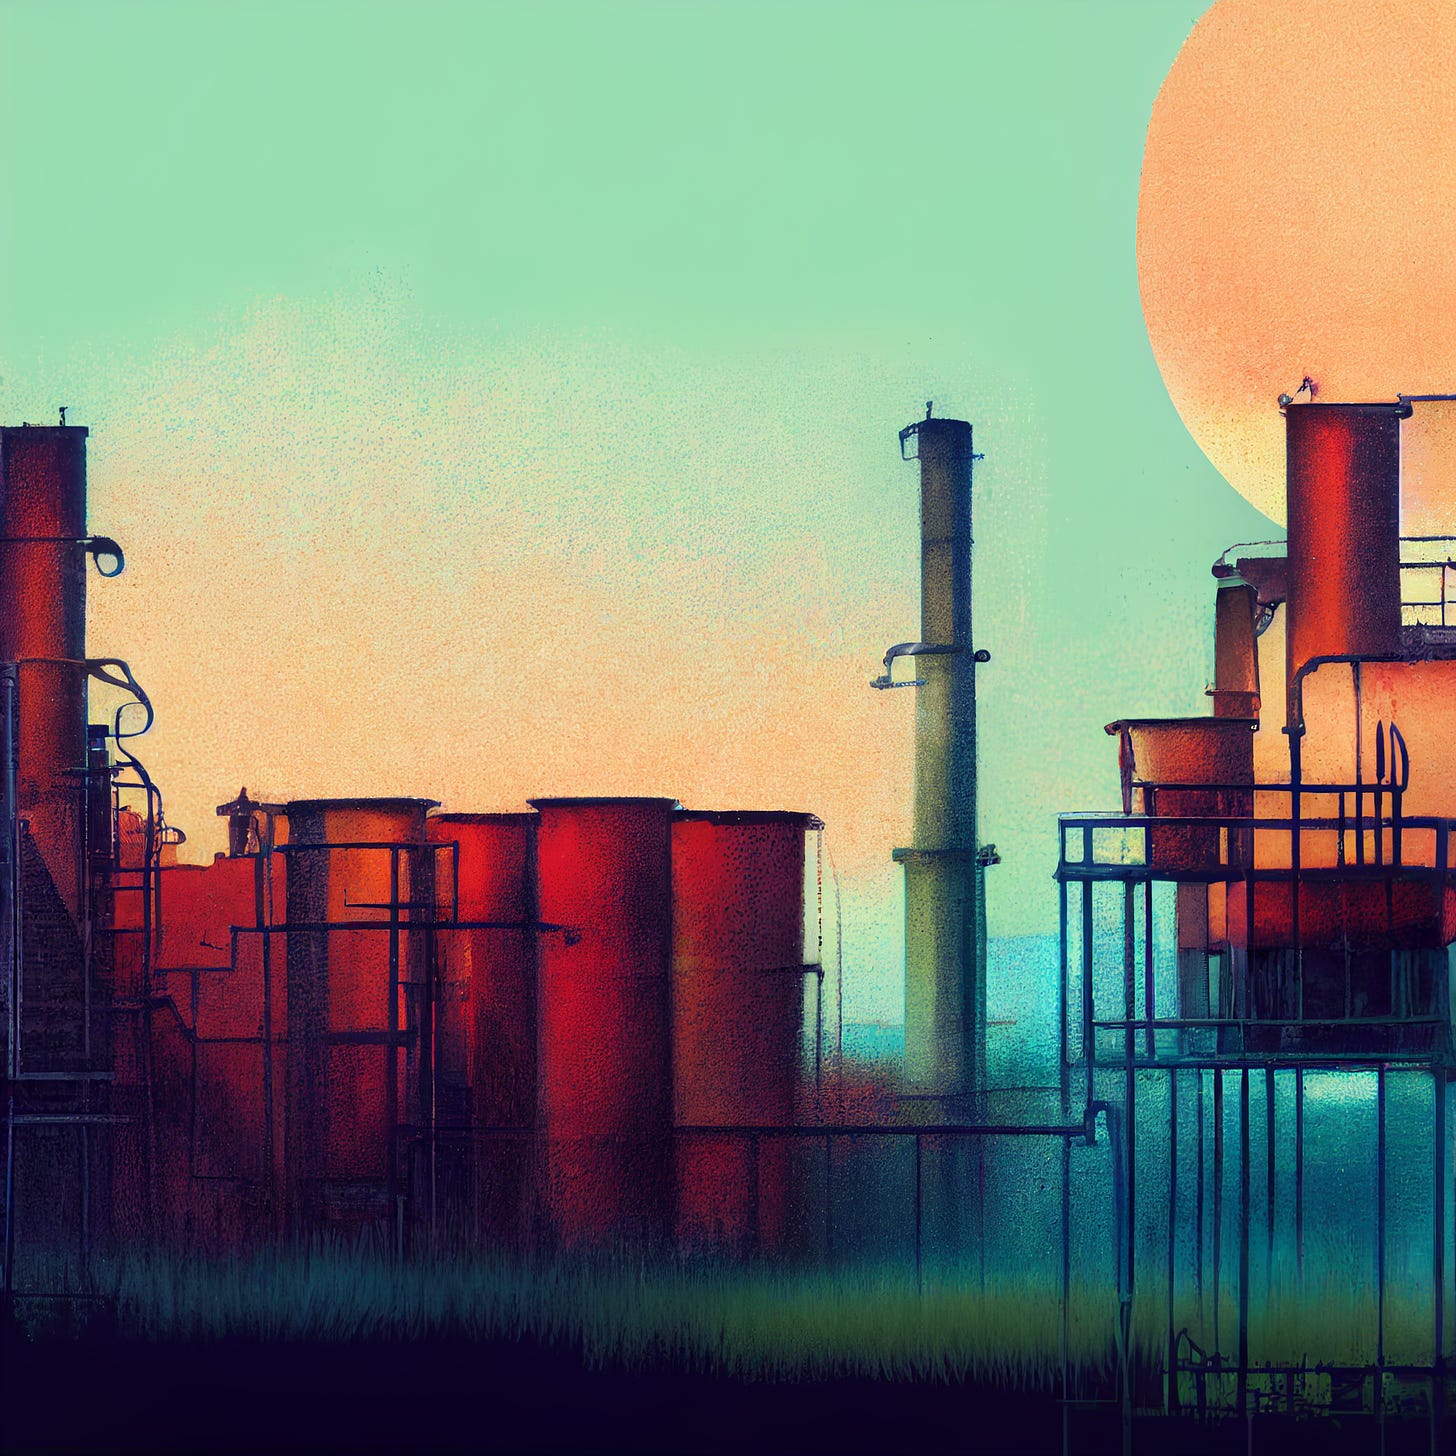 Generated image of a factory